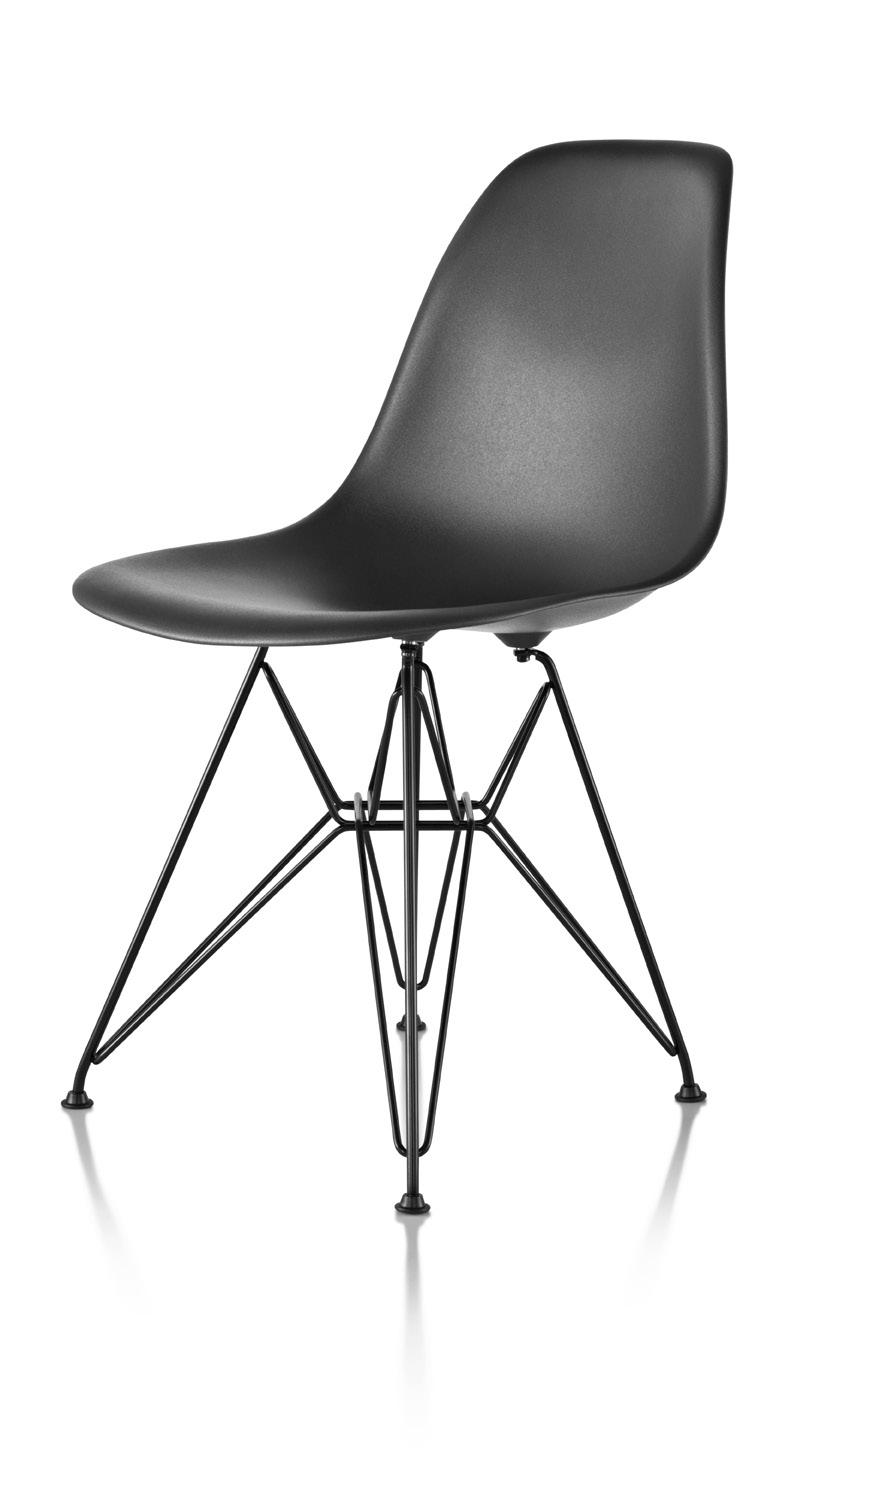 Eames Molded Plastic Side Chair Wire Base 16% recycled content; 100% recyclable The organic shape and sophisticated lines of molded plastic side chair make it a desirable design object as